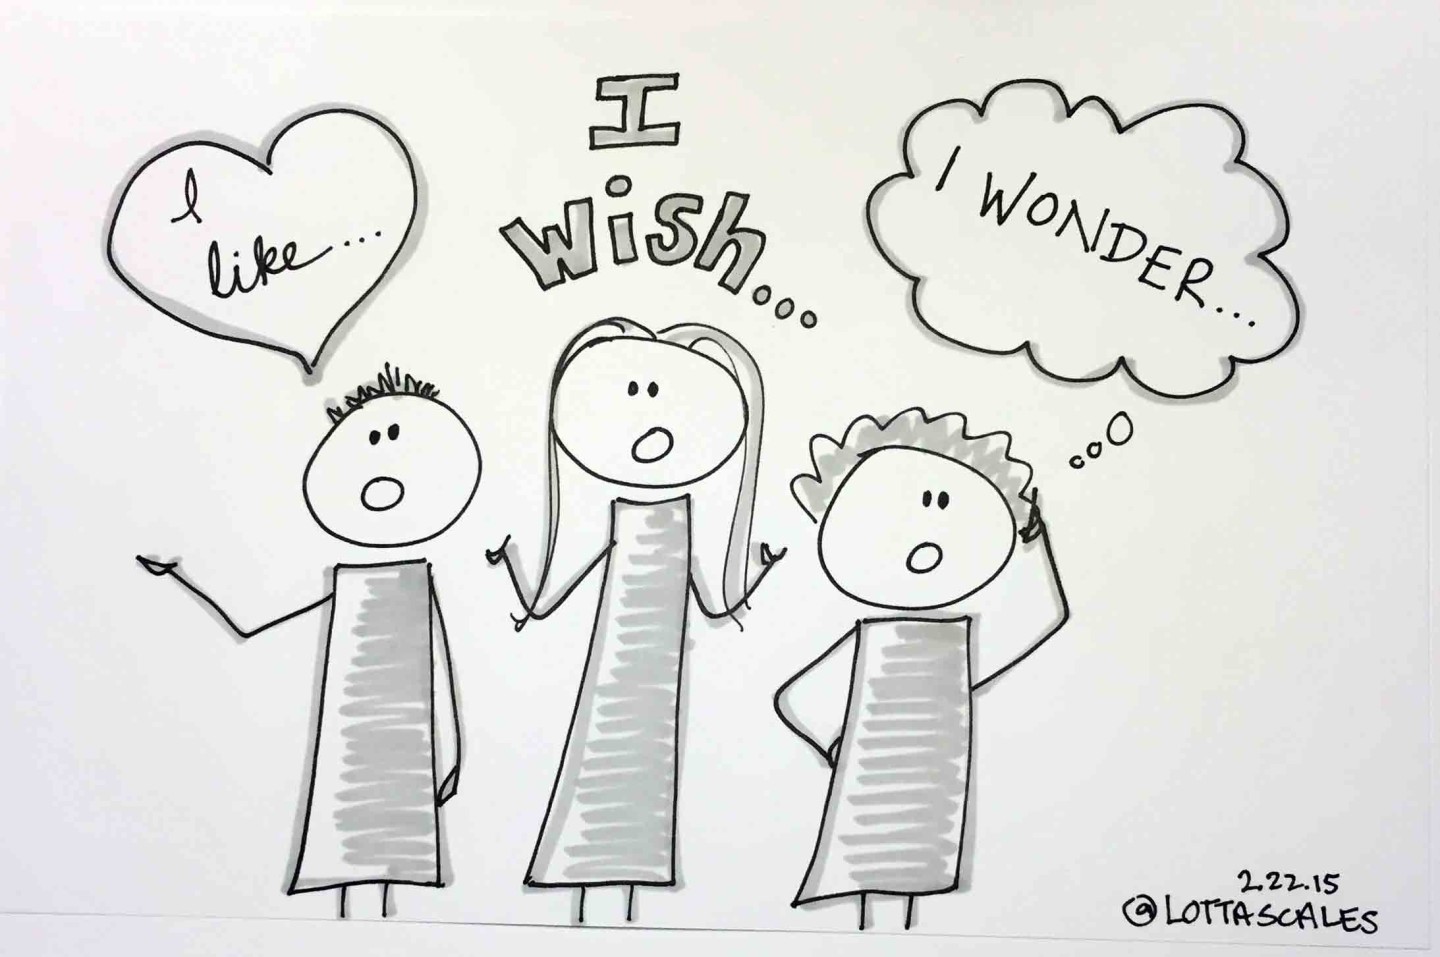 Making Learning Visible: Doodling Helps Memories Stick